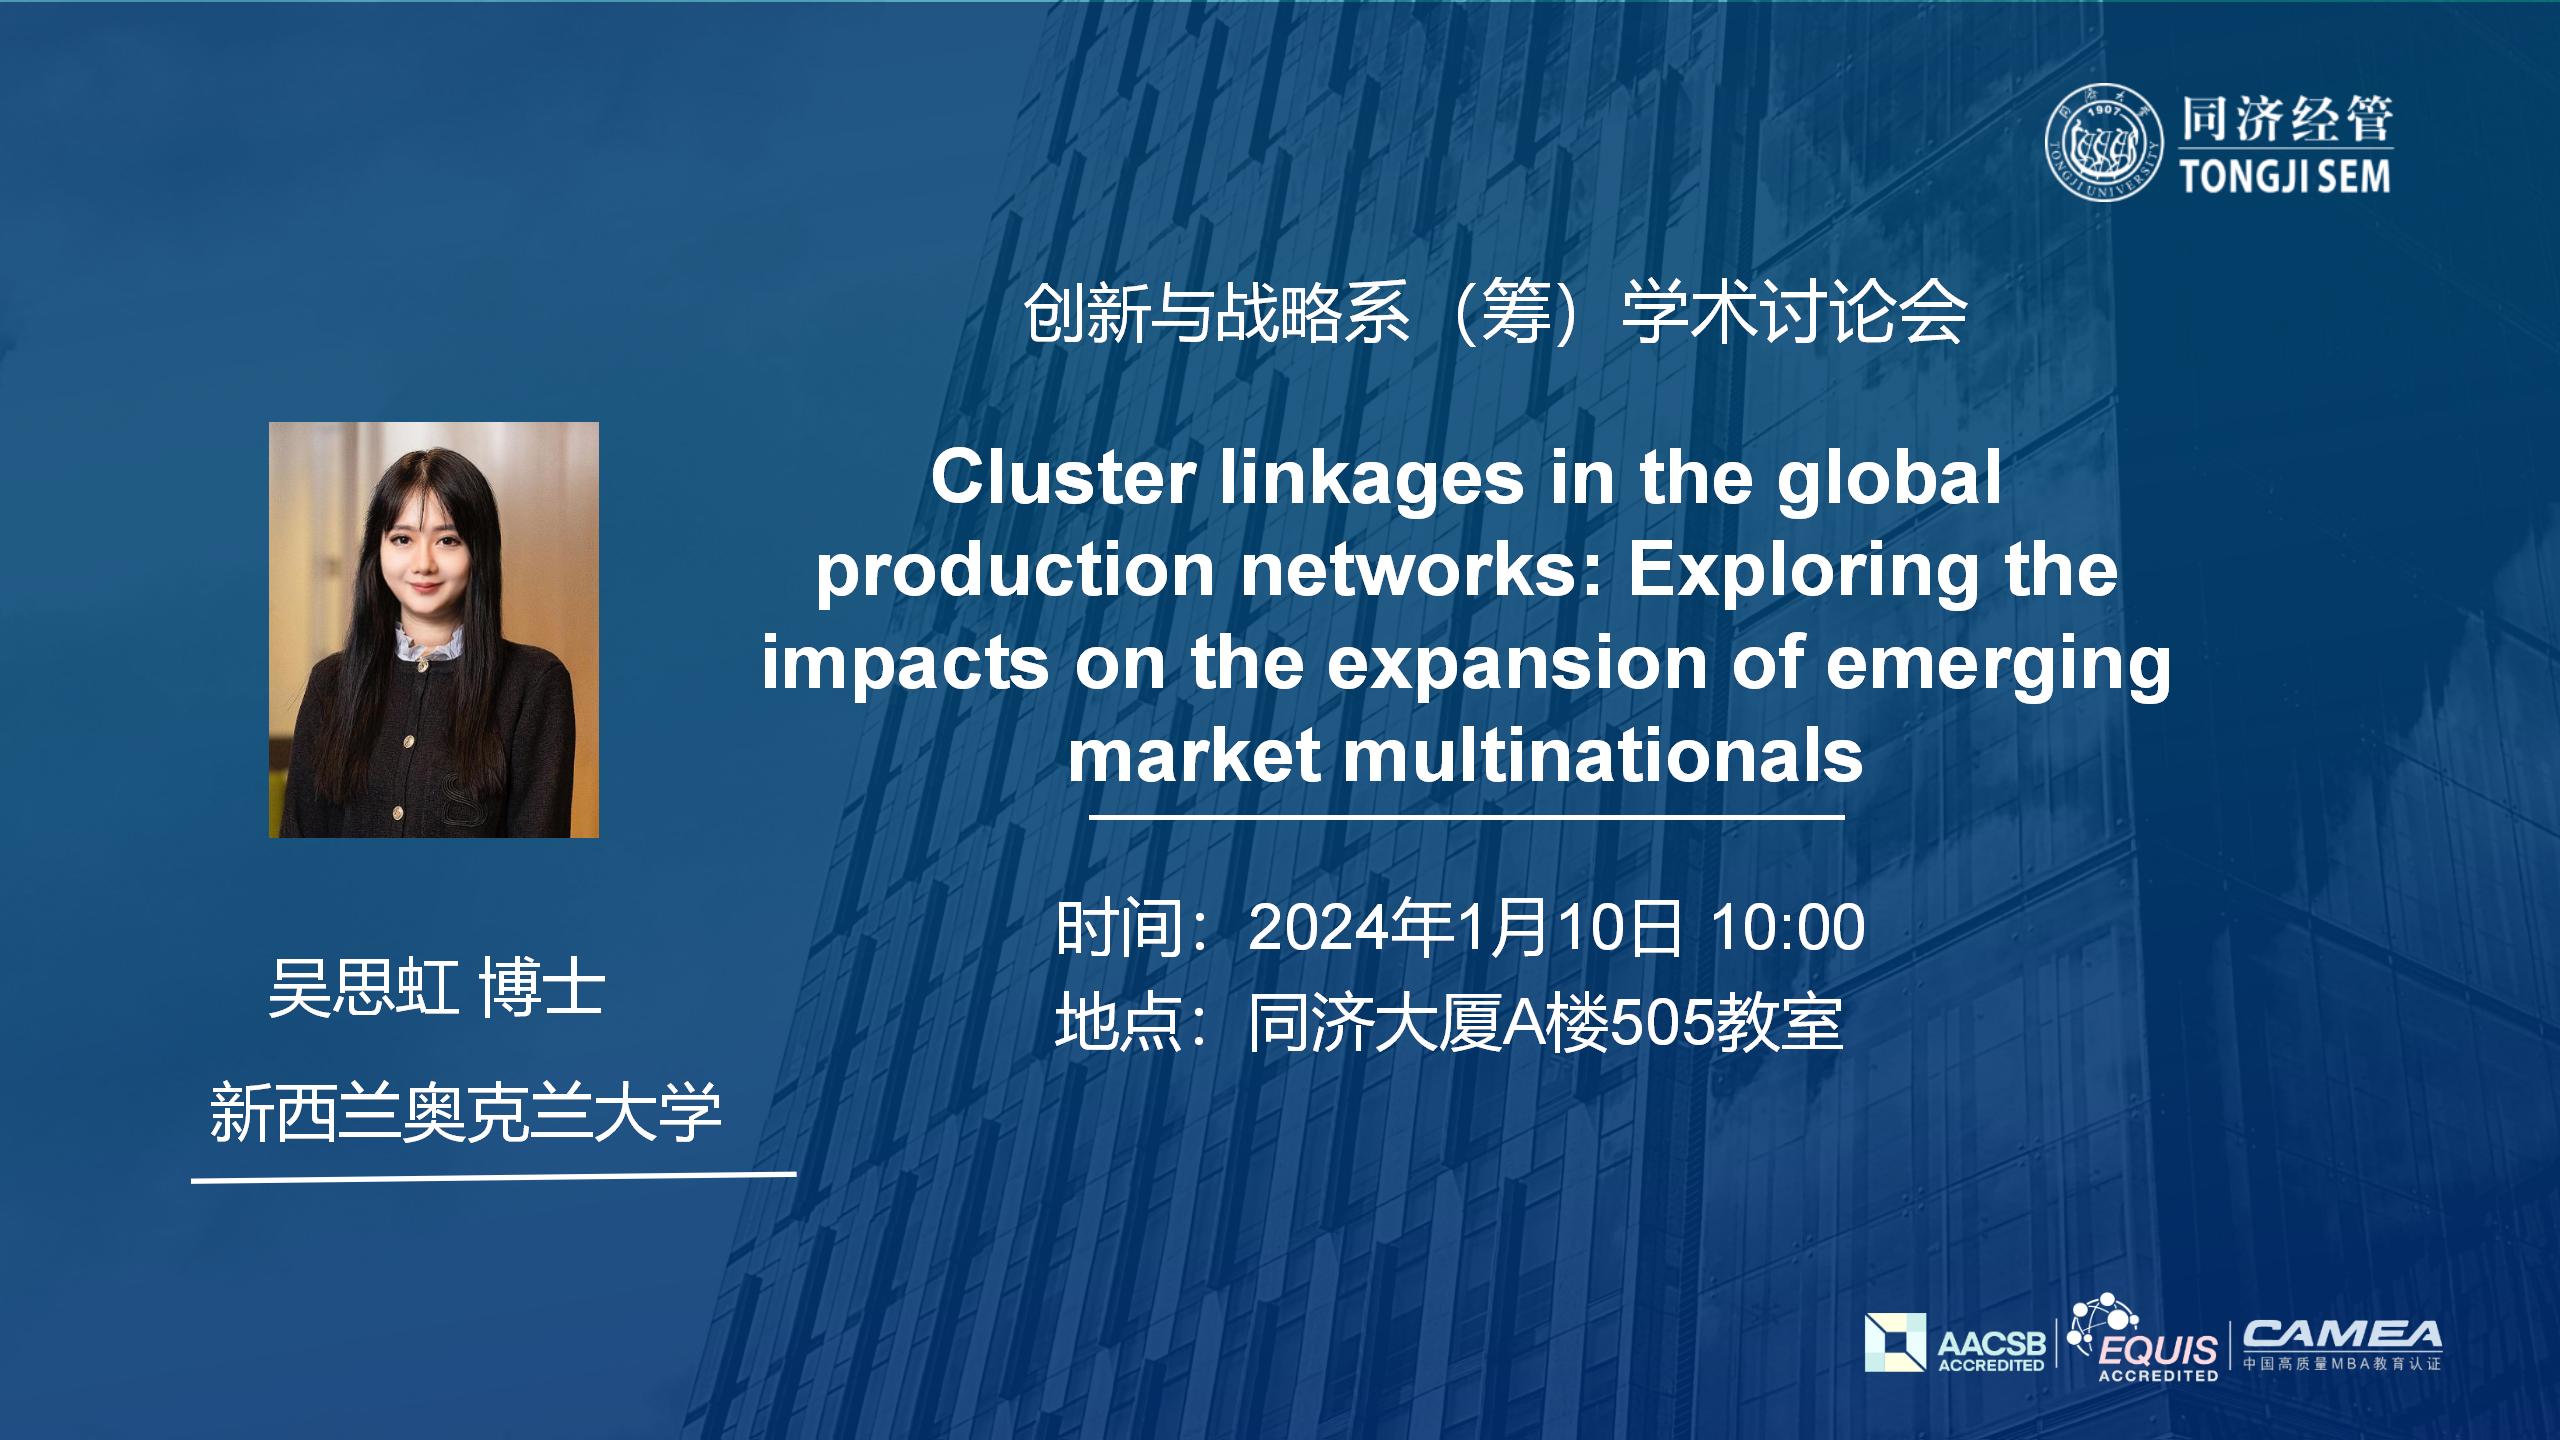 Cluster linkages in the global production networks: Exploring the impacts on the expansion of emerging market multinationals